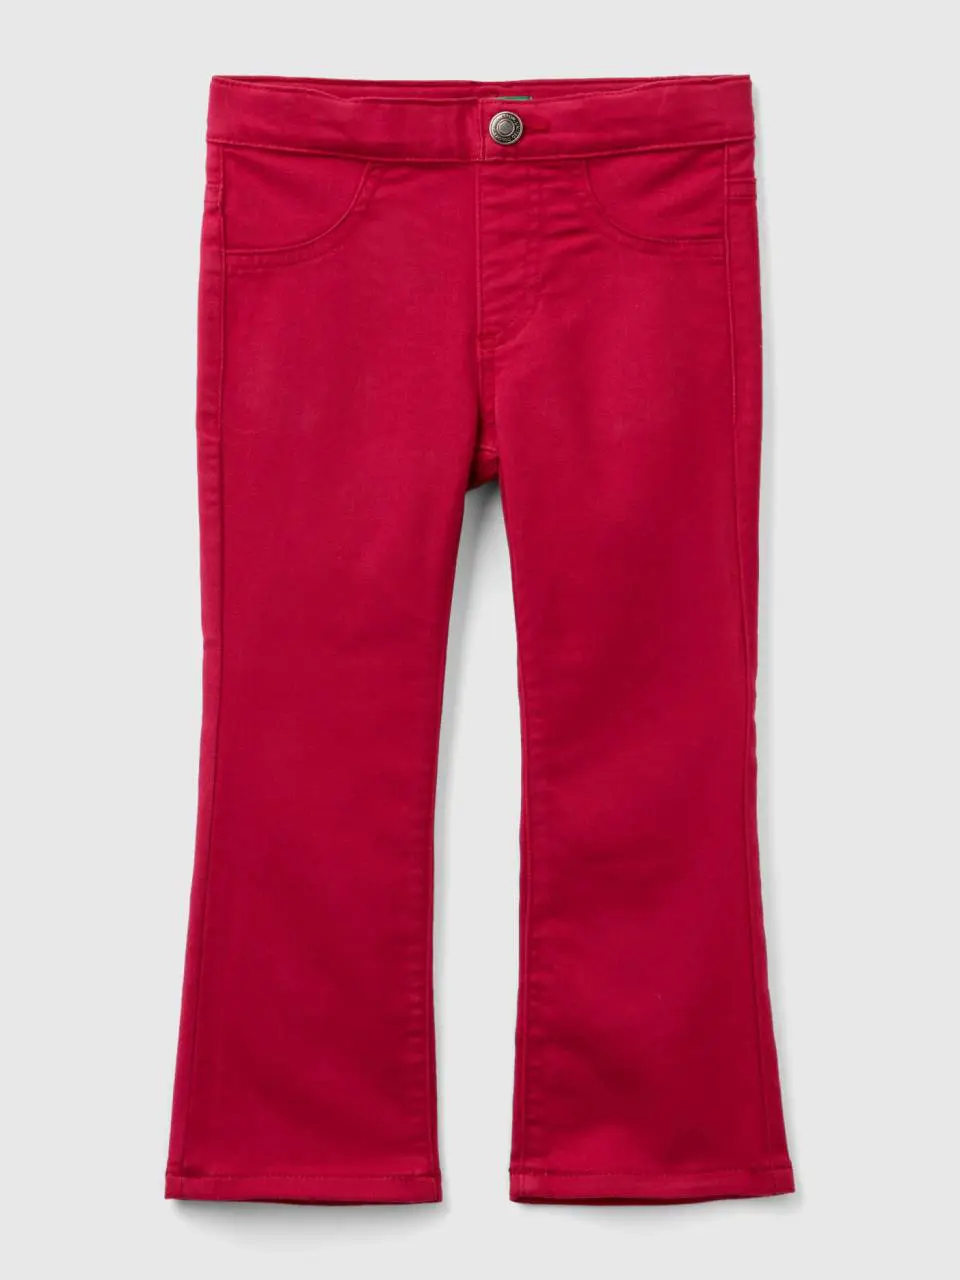 Benetton flared stretch trousers. 1